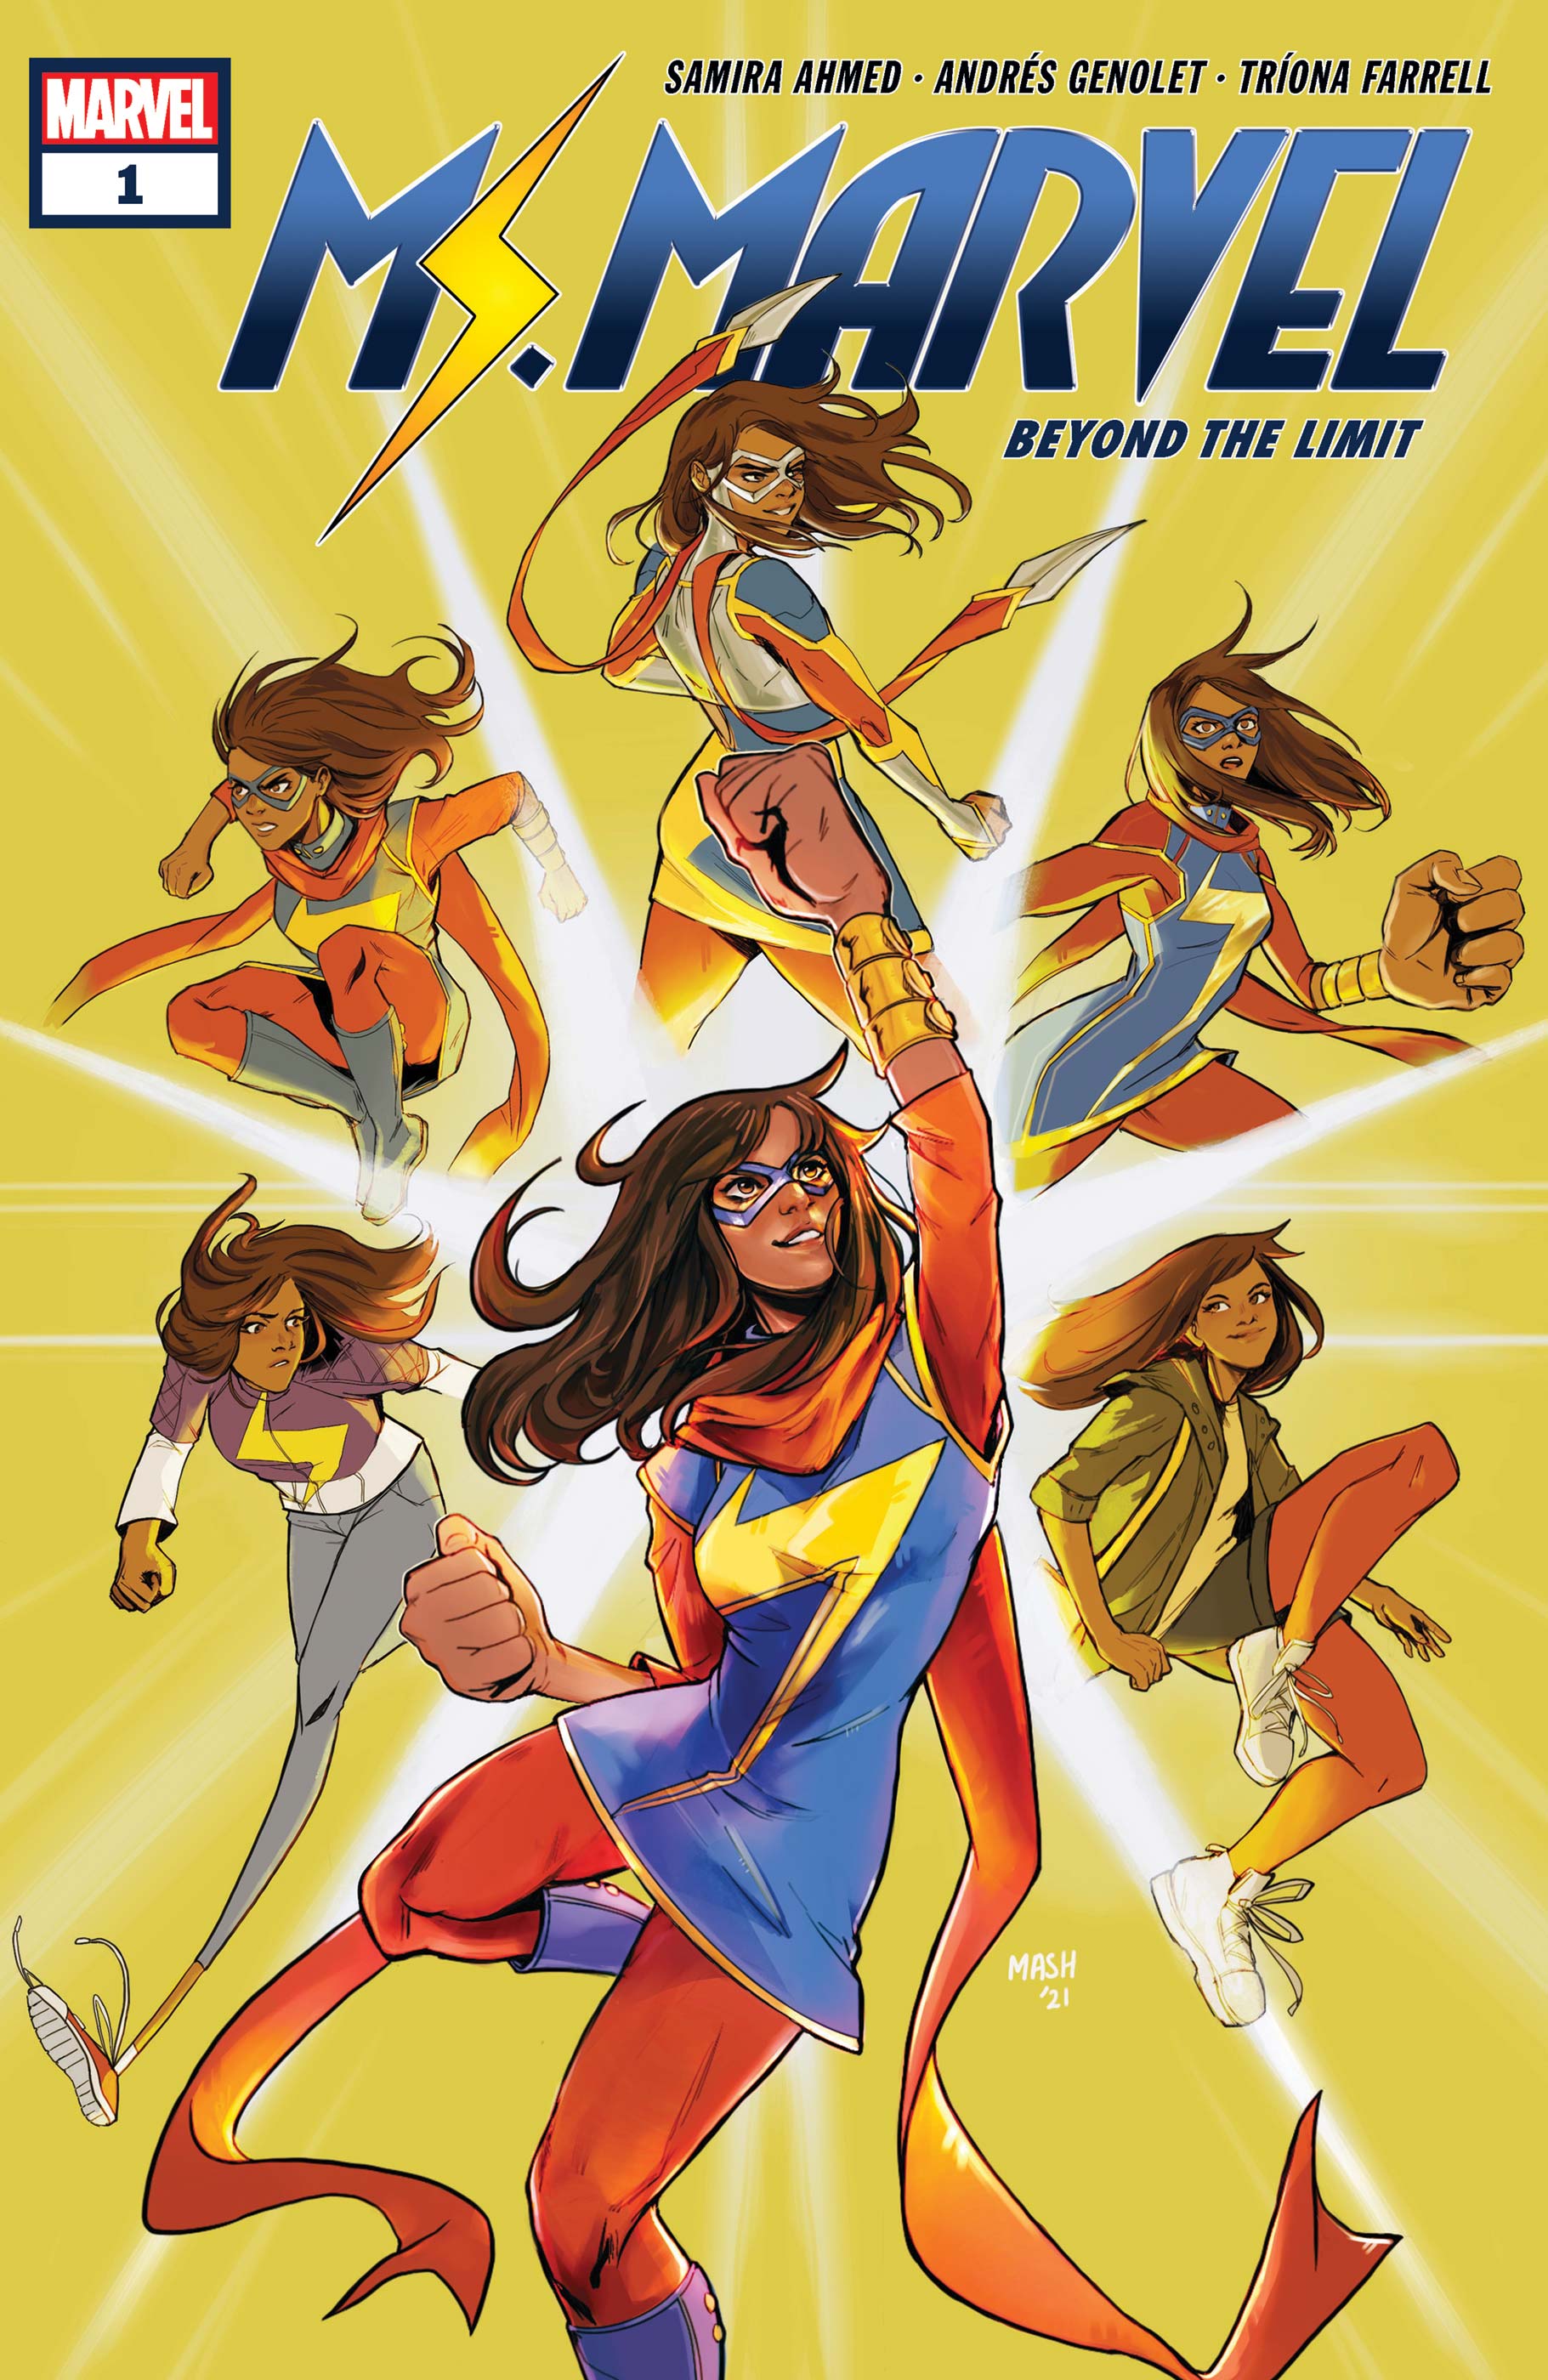 Ms. Marvel Beyond the Limit cover showcasing six versions of Ms. Marvel in fighting poses